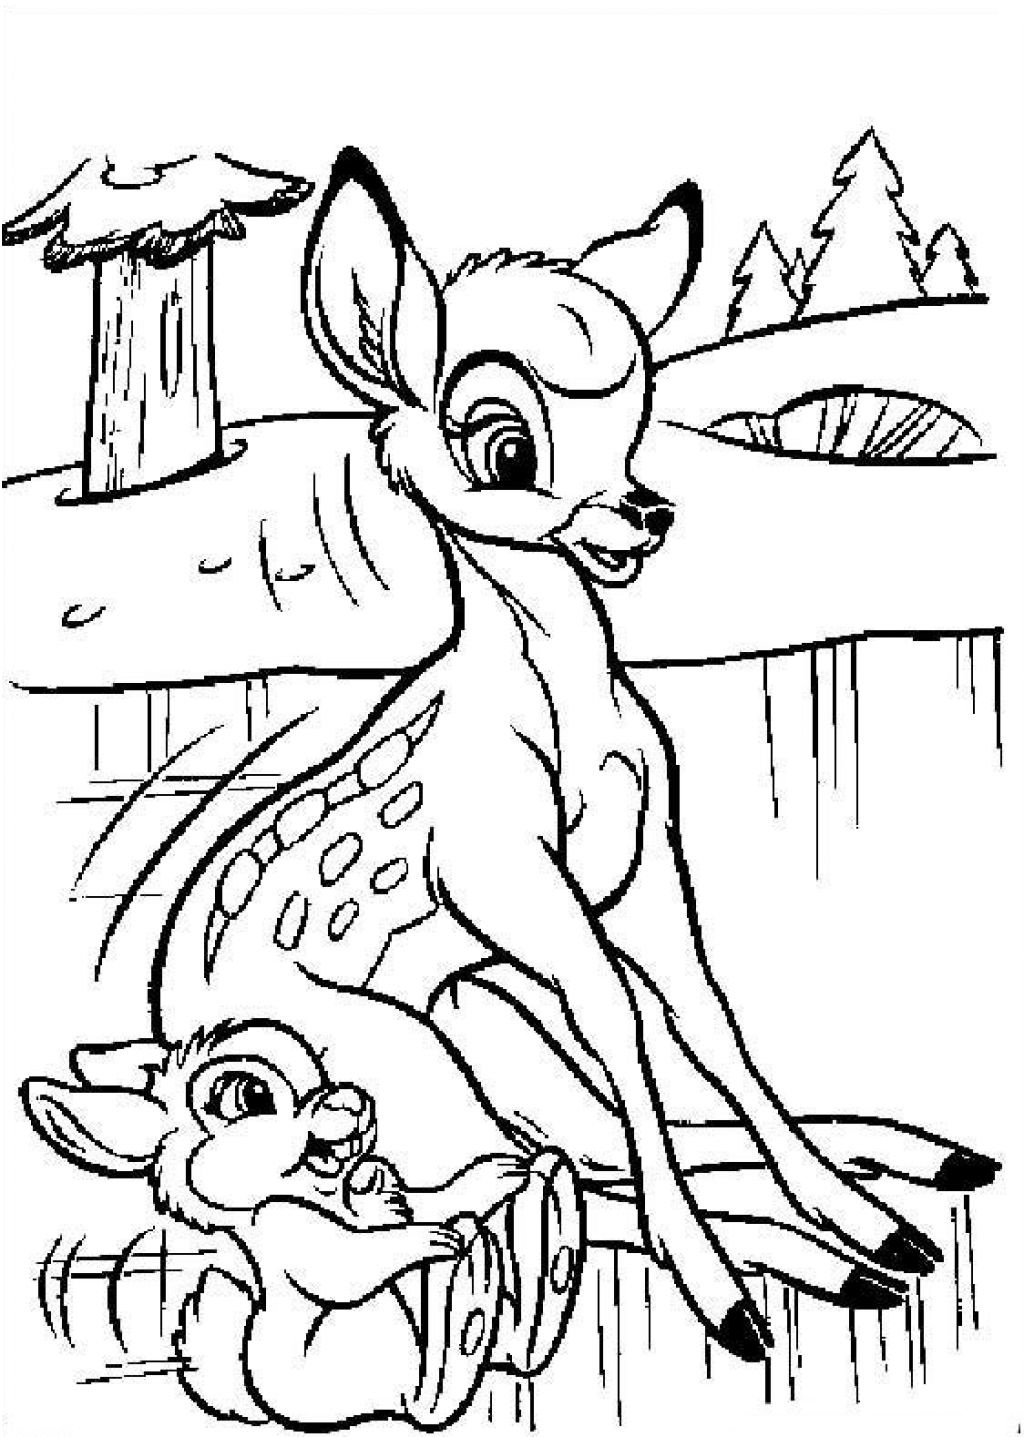 Free Printable Bambi Coloring Pages For Kids